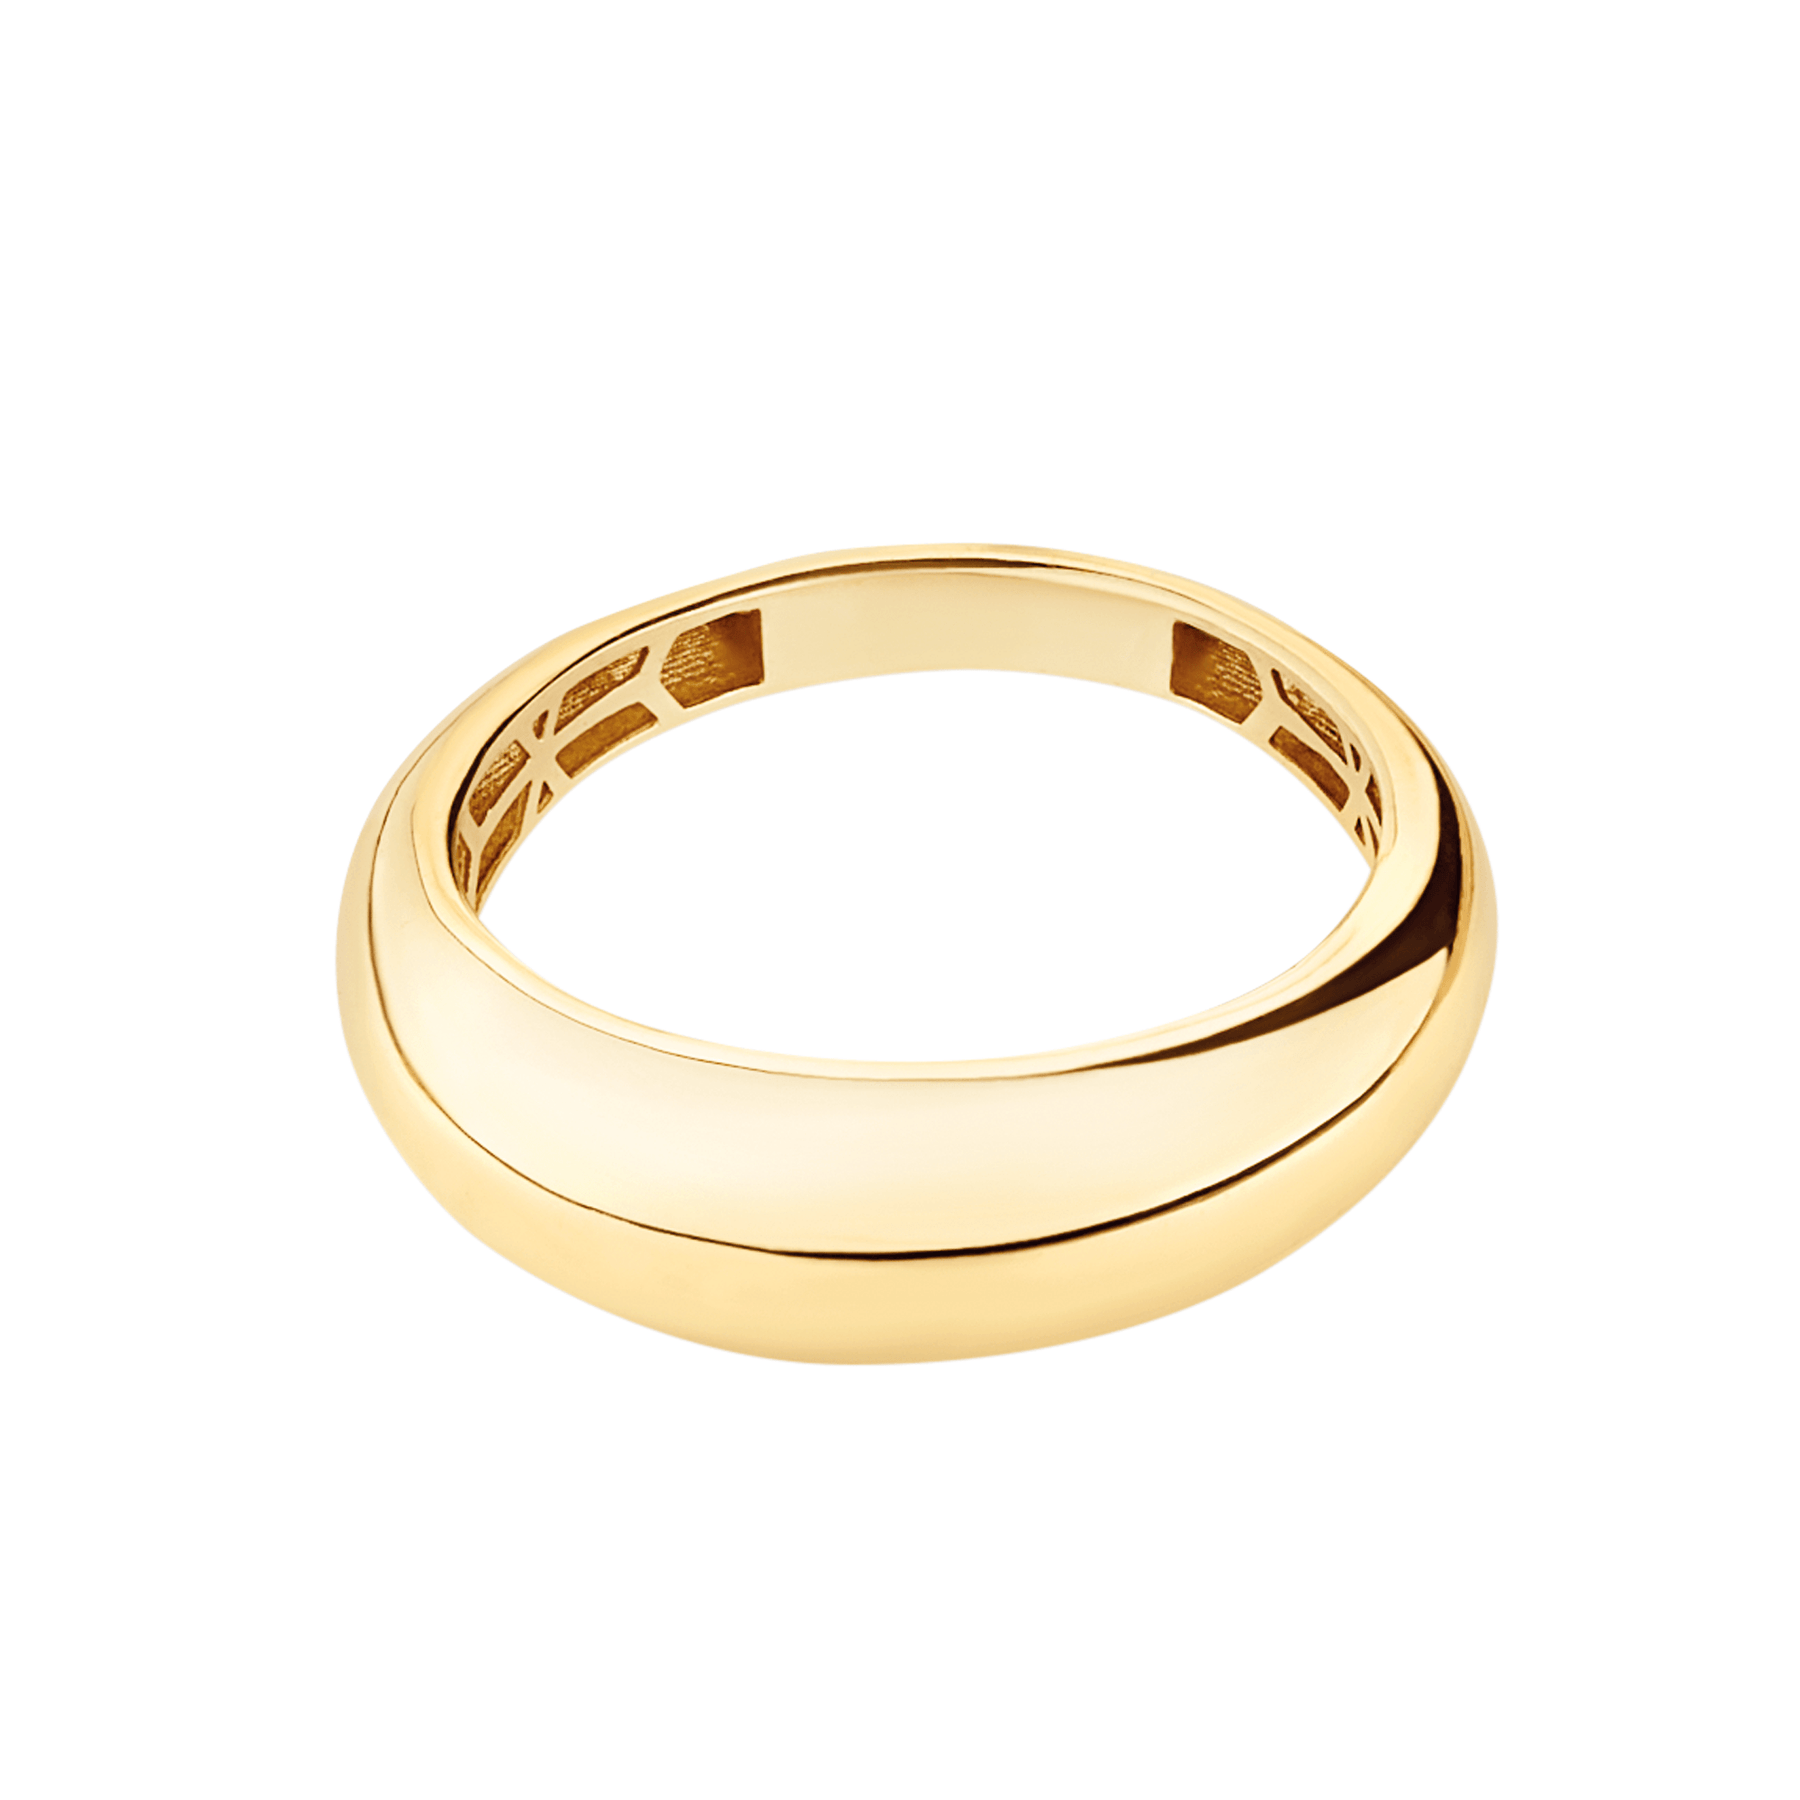 Dome Ring in 9ct Yellow Gold